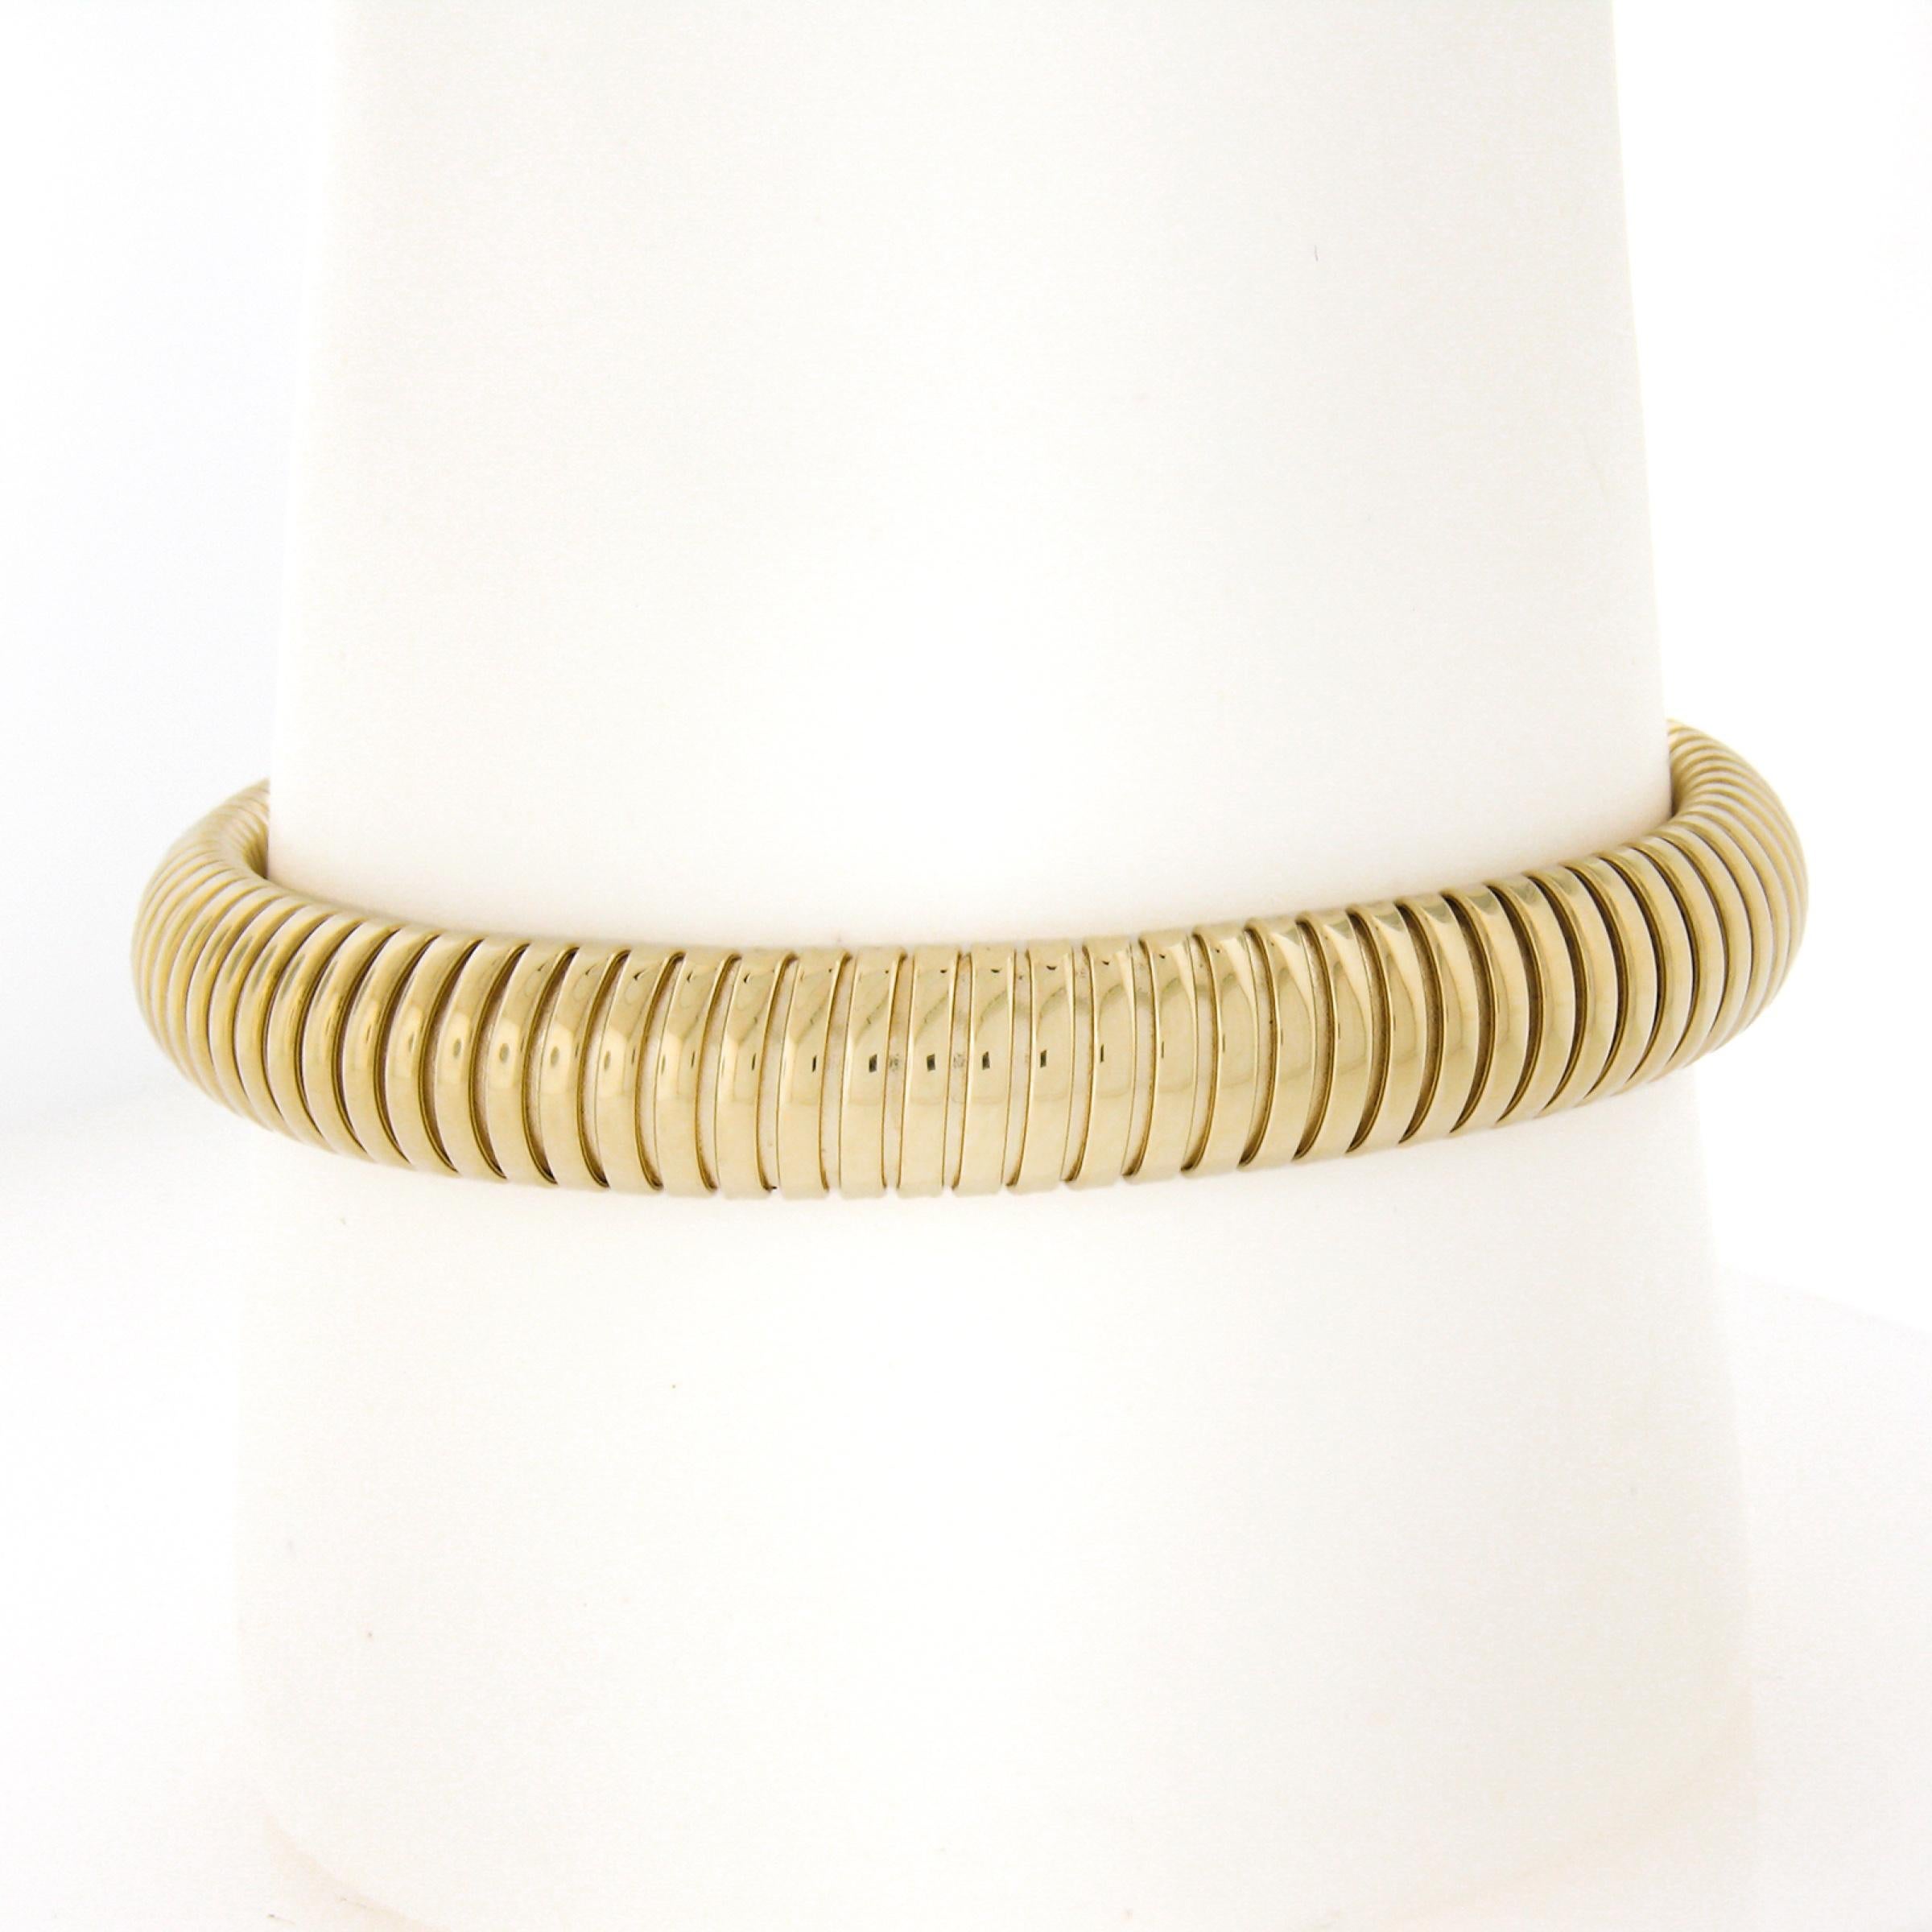 Material: Solid 14k Yellow Gold
Weight: 20.83 Grams
Chain Type: Accordion Snake Link Chains
Chain Length:	Will fit a 7 inch wrist. (Fitted on a wrist)
Chain Width: 9.3mm
Chain Thickness: 5.1mm rise off the wrist
Clasp: Push clasp
Condition: Estate.